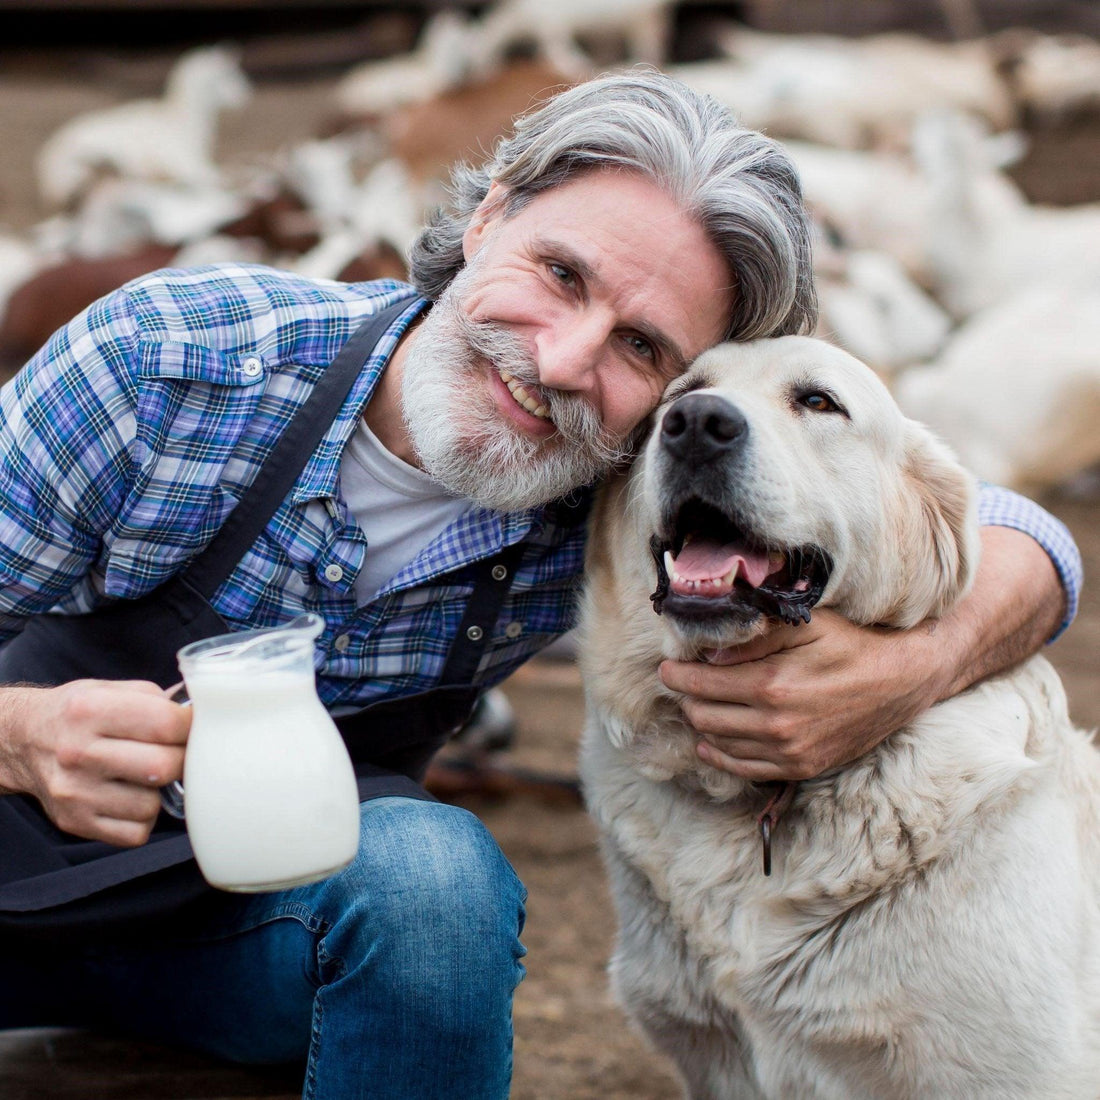 is goat milk good for your pet?